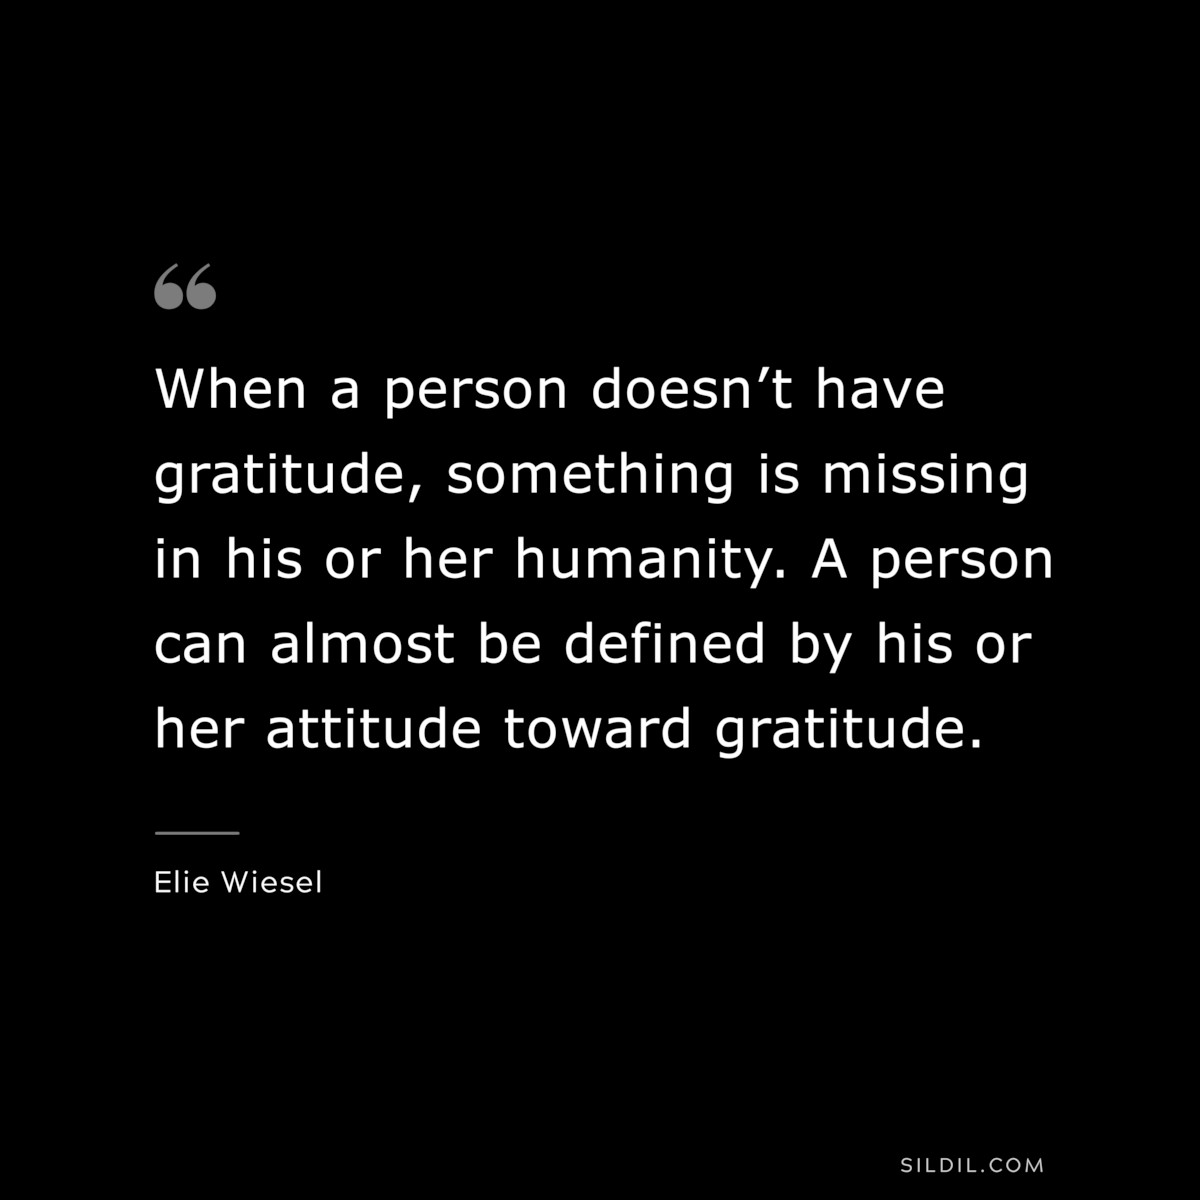 When a person doesn’t have gratitude, something is missing in his or her humanity. A person can almost be defined by his or her attitude toward gratitude. ― Elie Wiesel